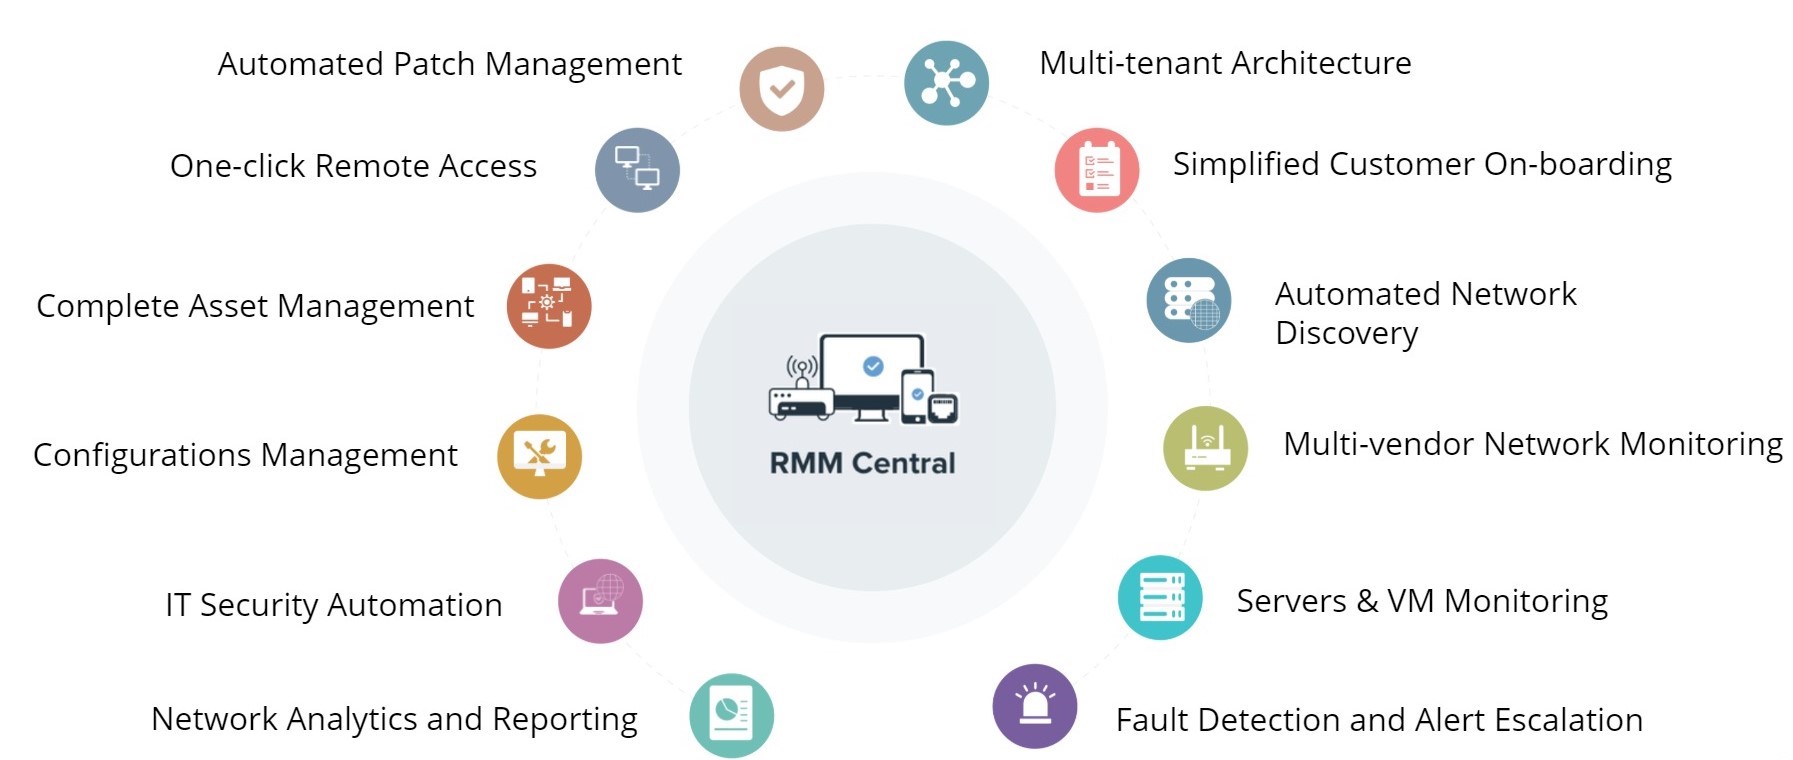 Managed IT Services Solutions by ManageEngine RMM Central